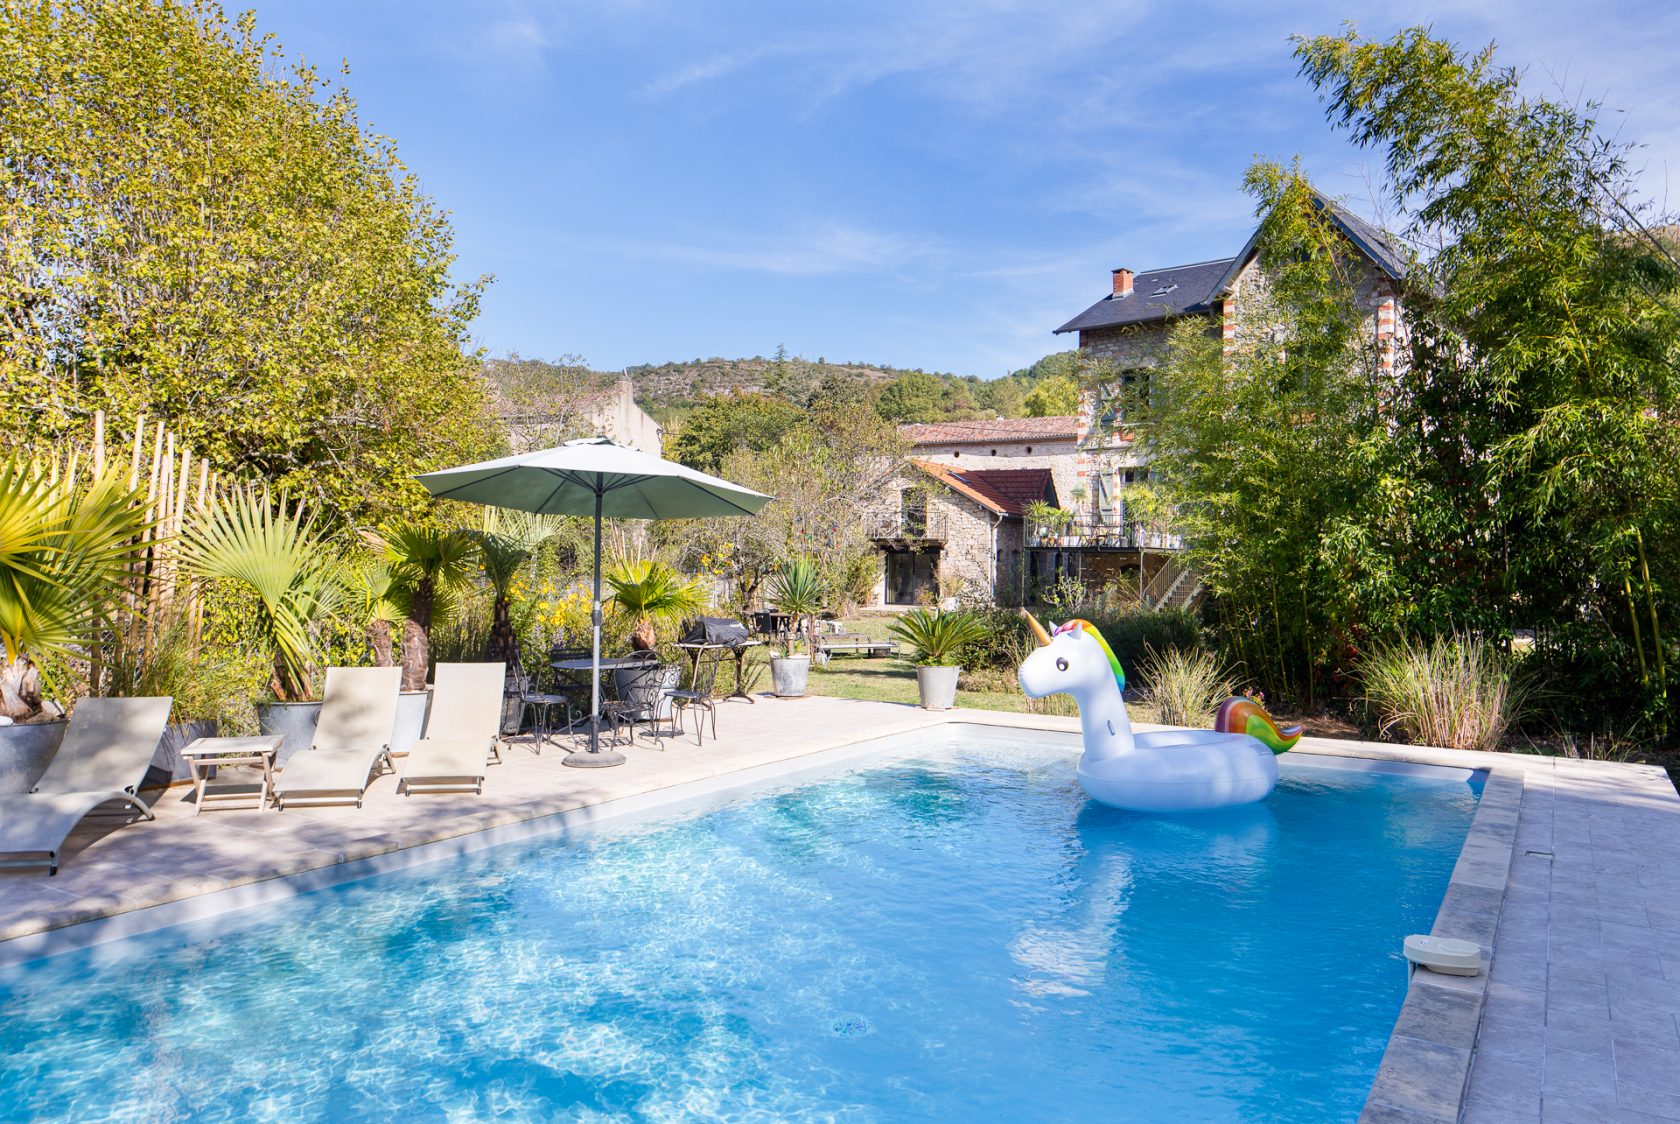 Character house, gîte and swimming pool close to the heart of the town